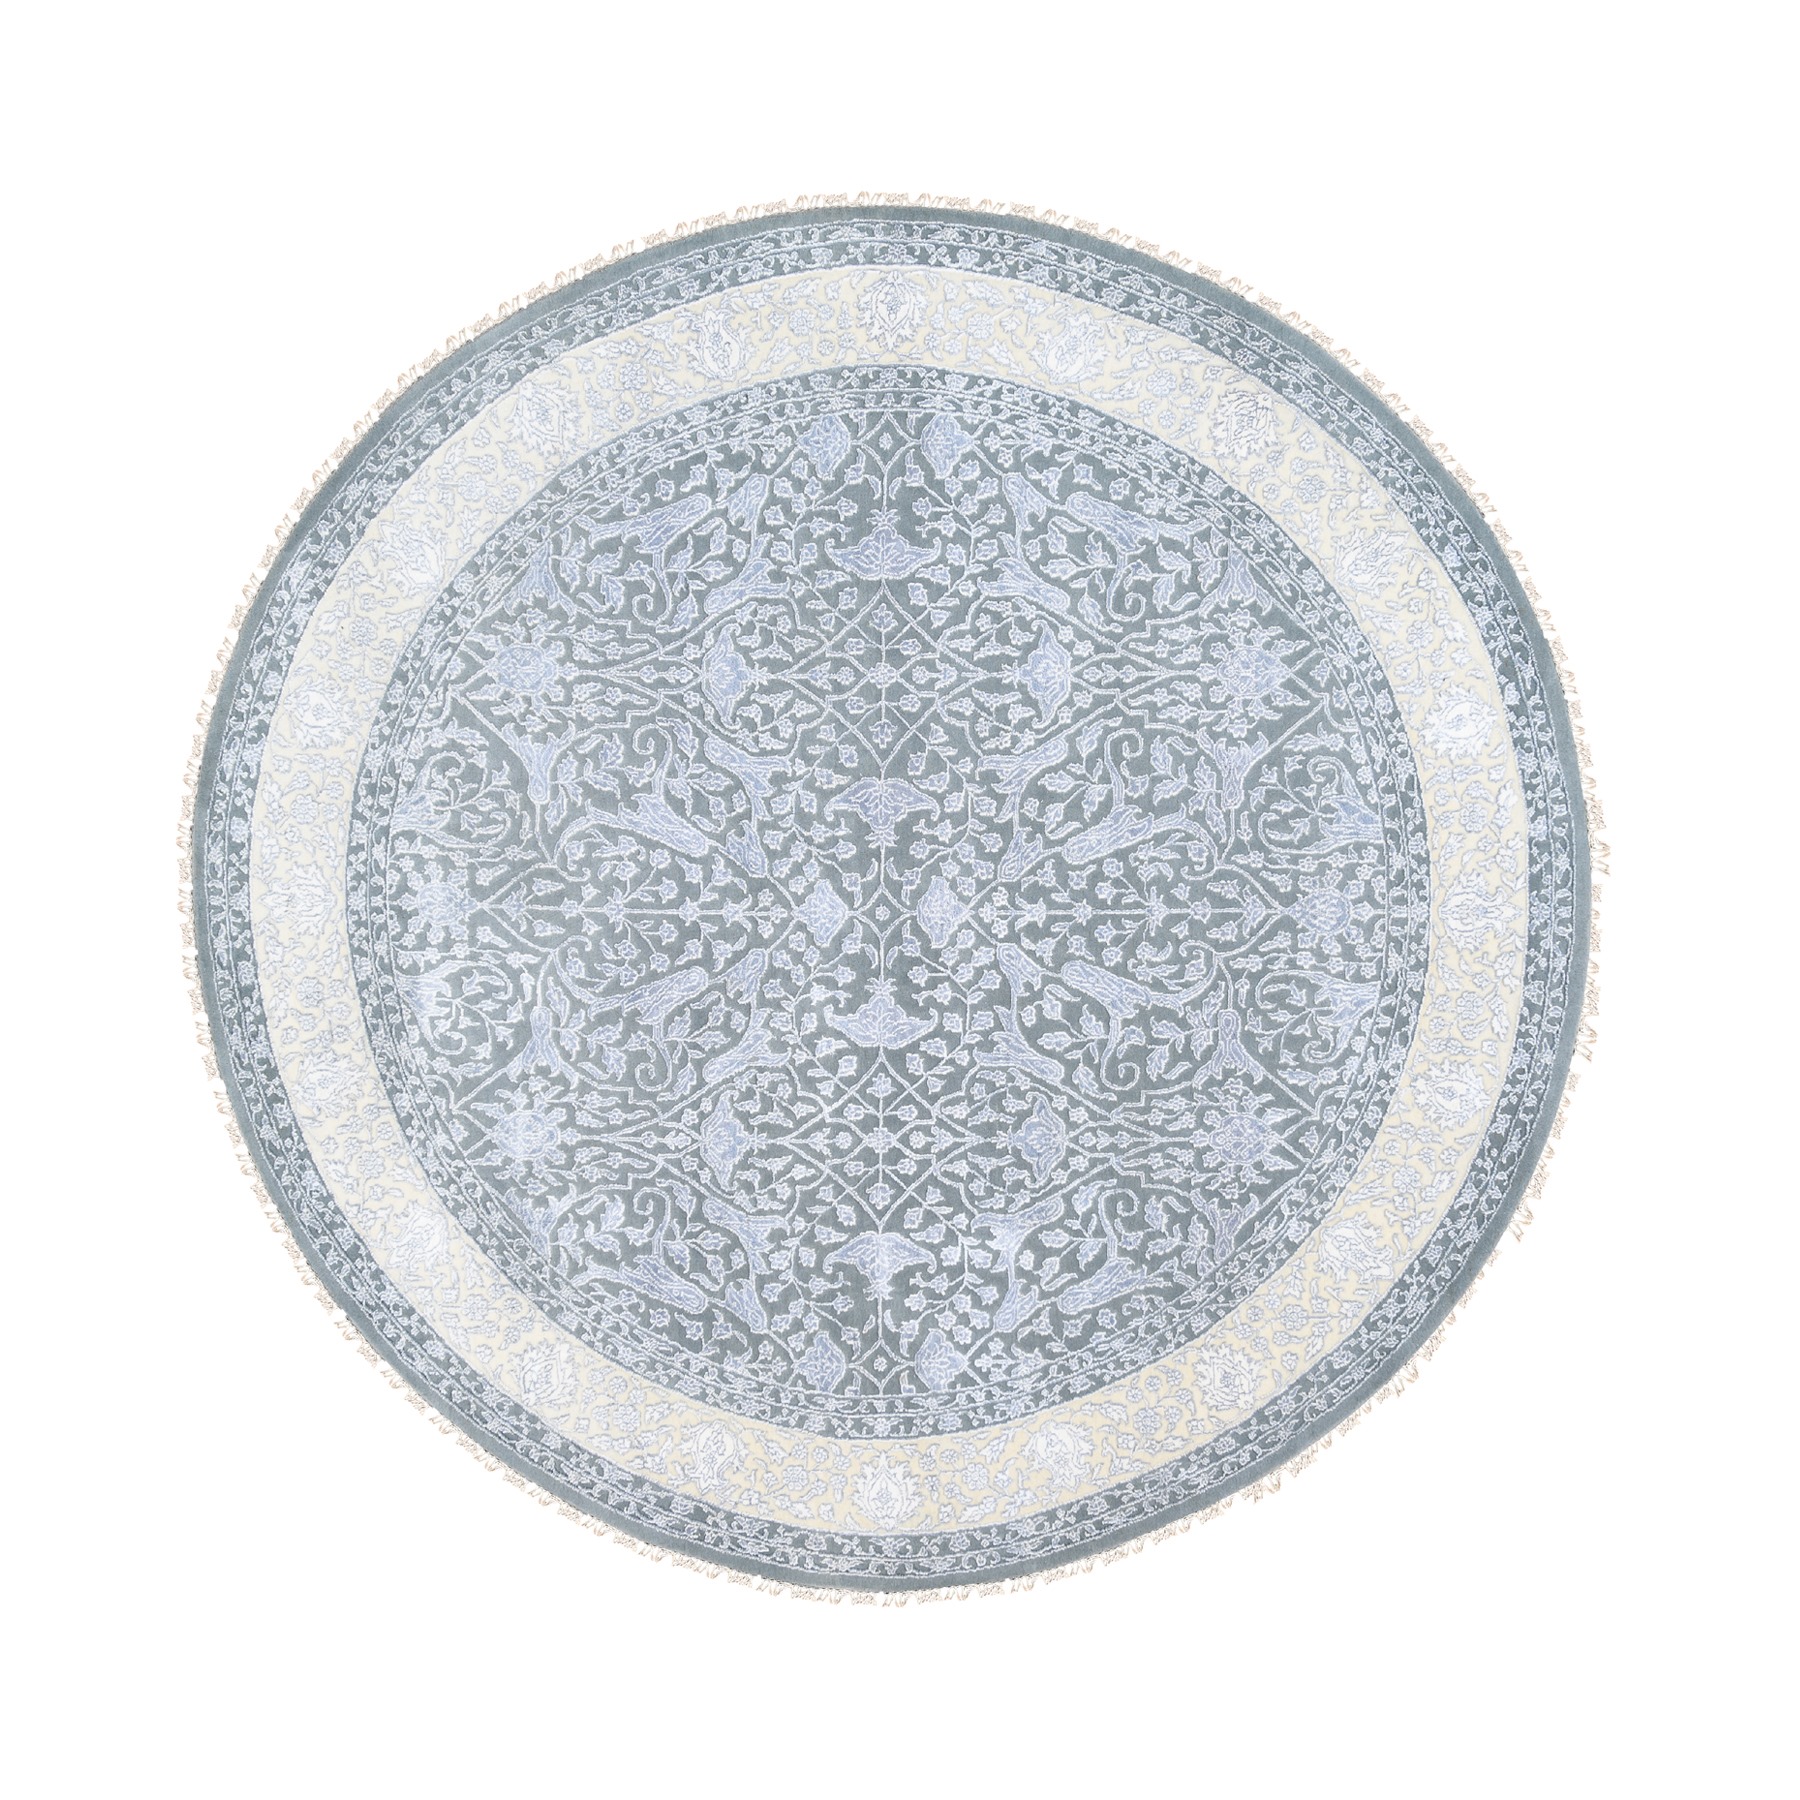 Pirniakan Collection Hand Knotted Grey Rug No: 1124502